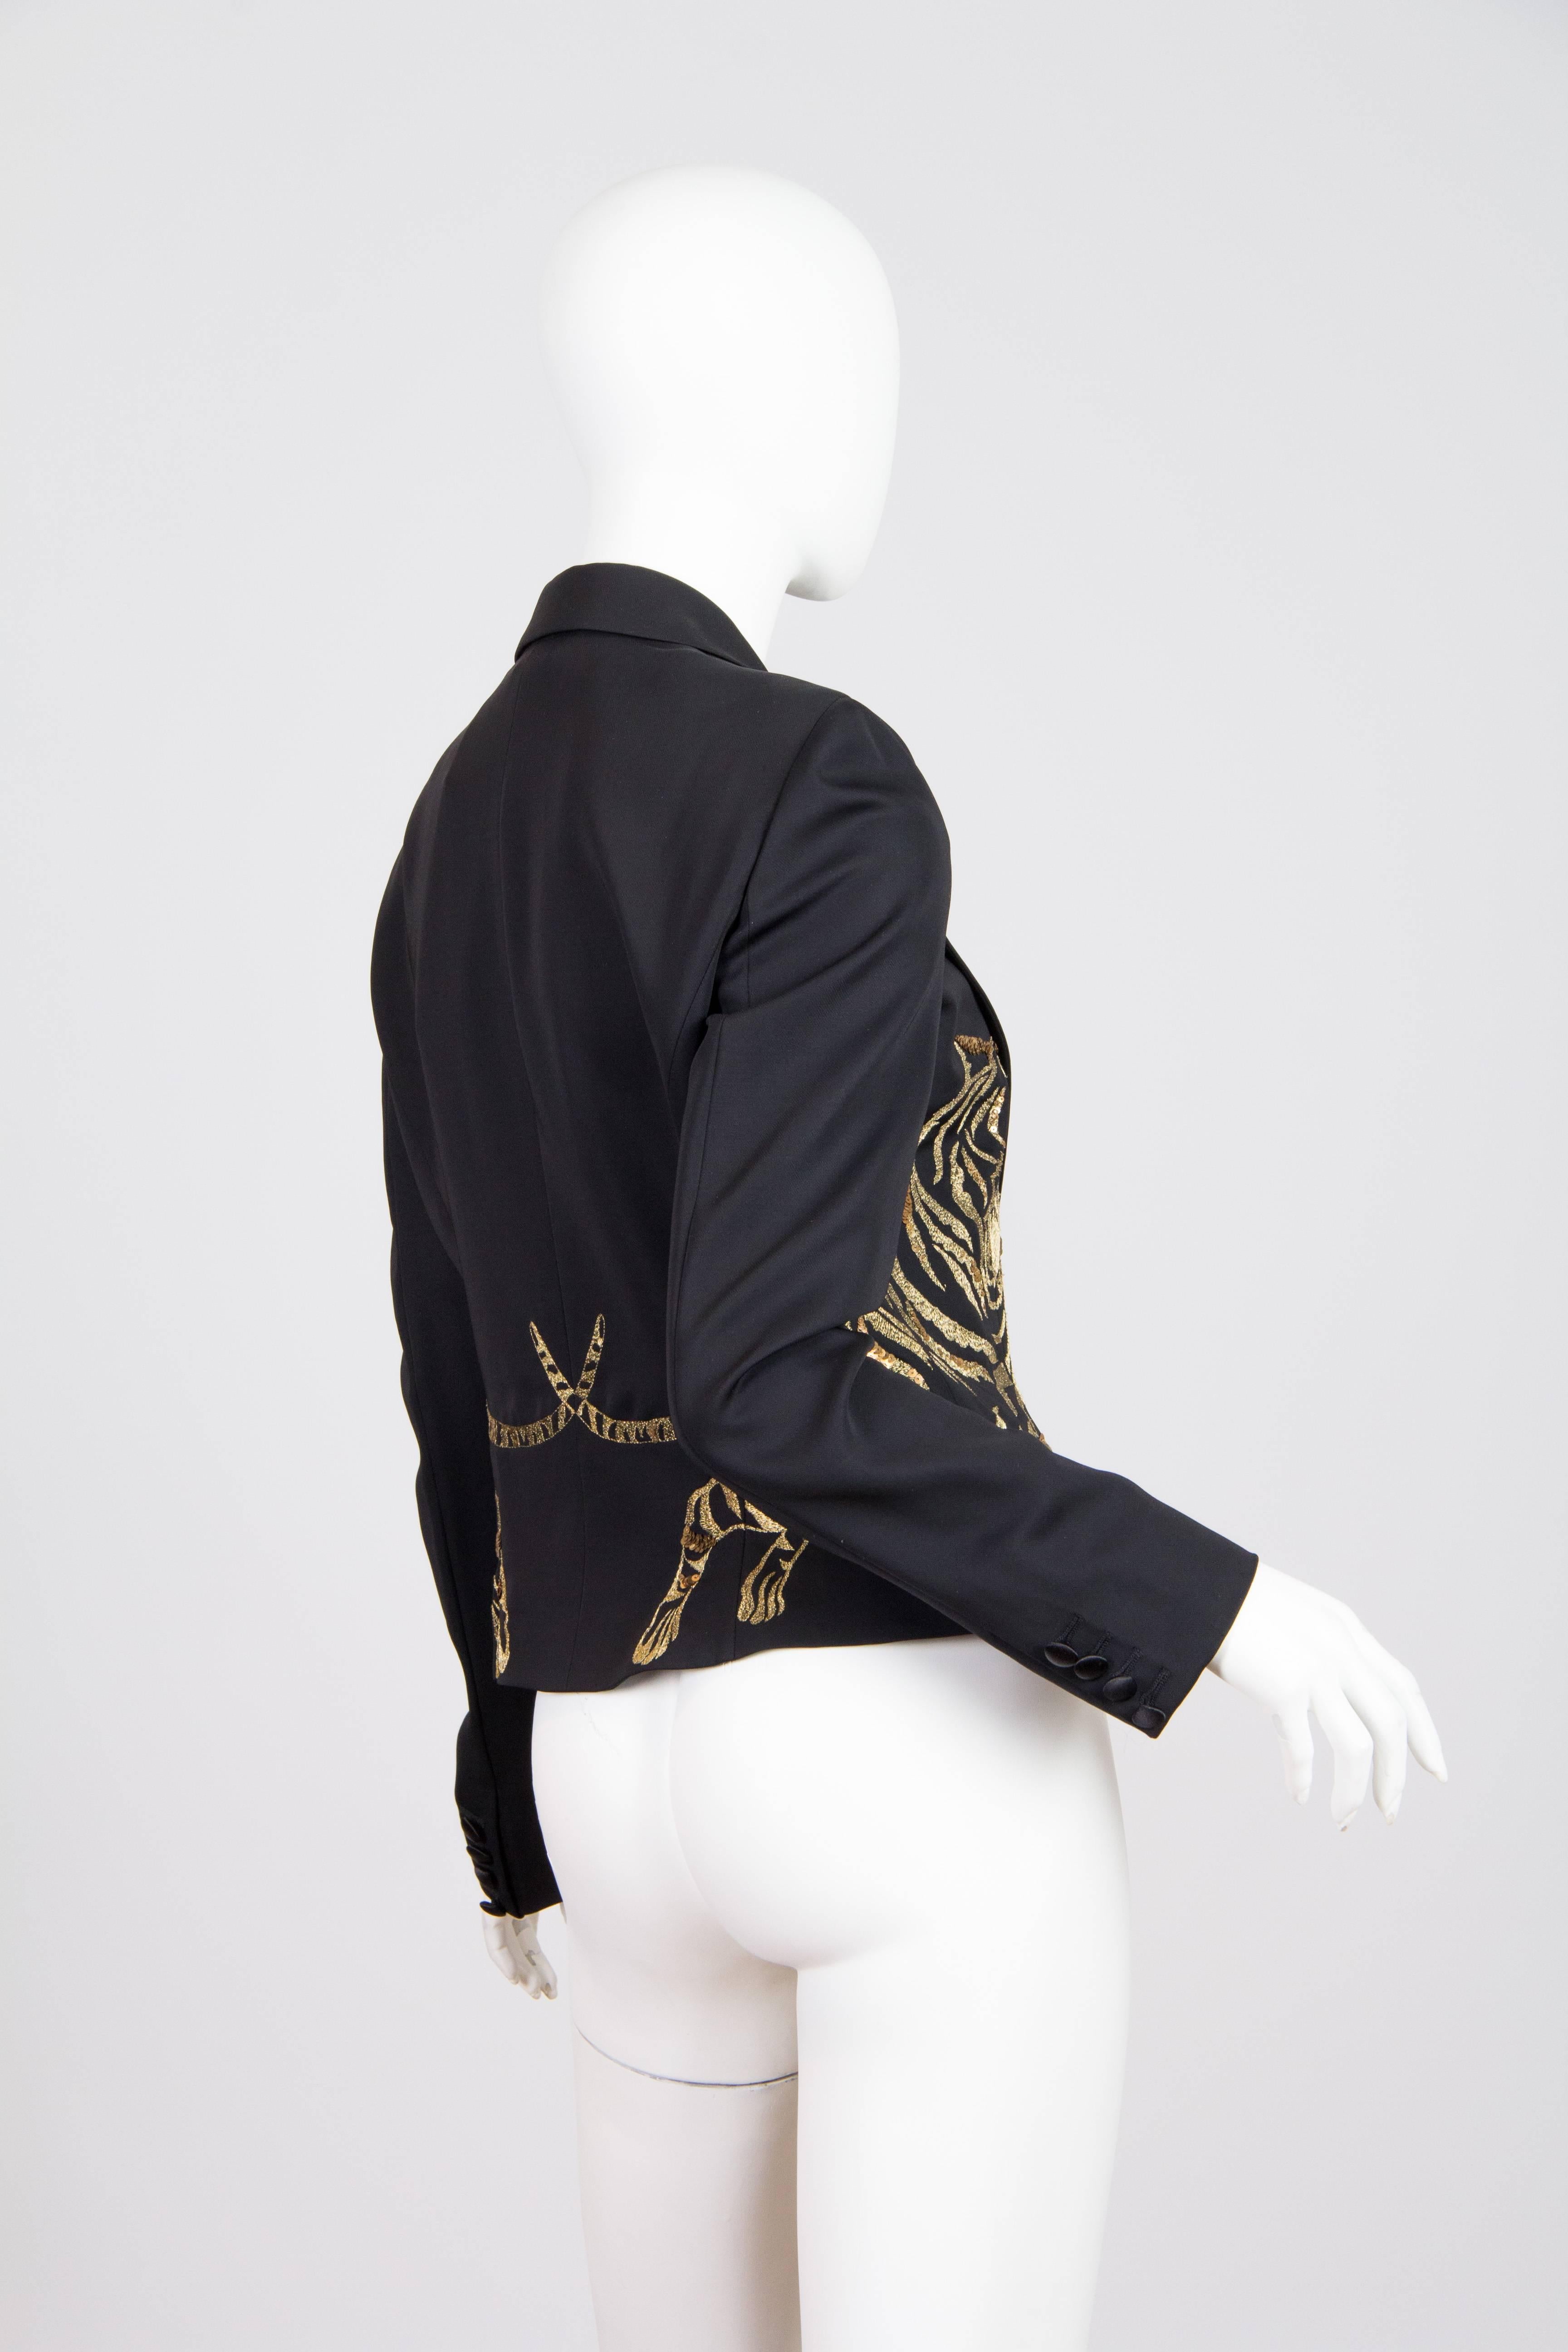 Alexander McQueen Perfect fitted black jacket from fall 2007. A pair of leaping tigers sets off the waistline of this jacket. The added sequins and crystals accent the embroidery, taking it next level as McQueen always did.